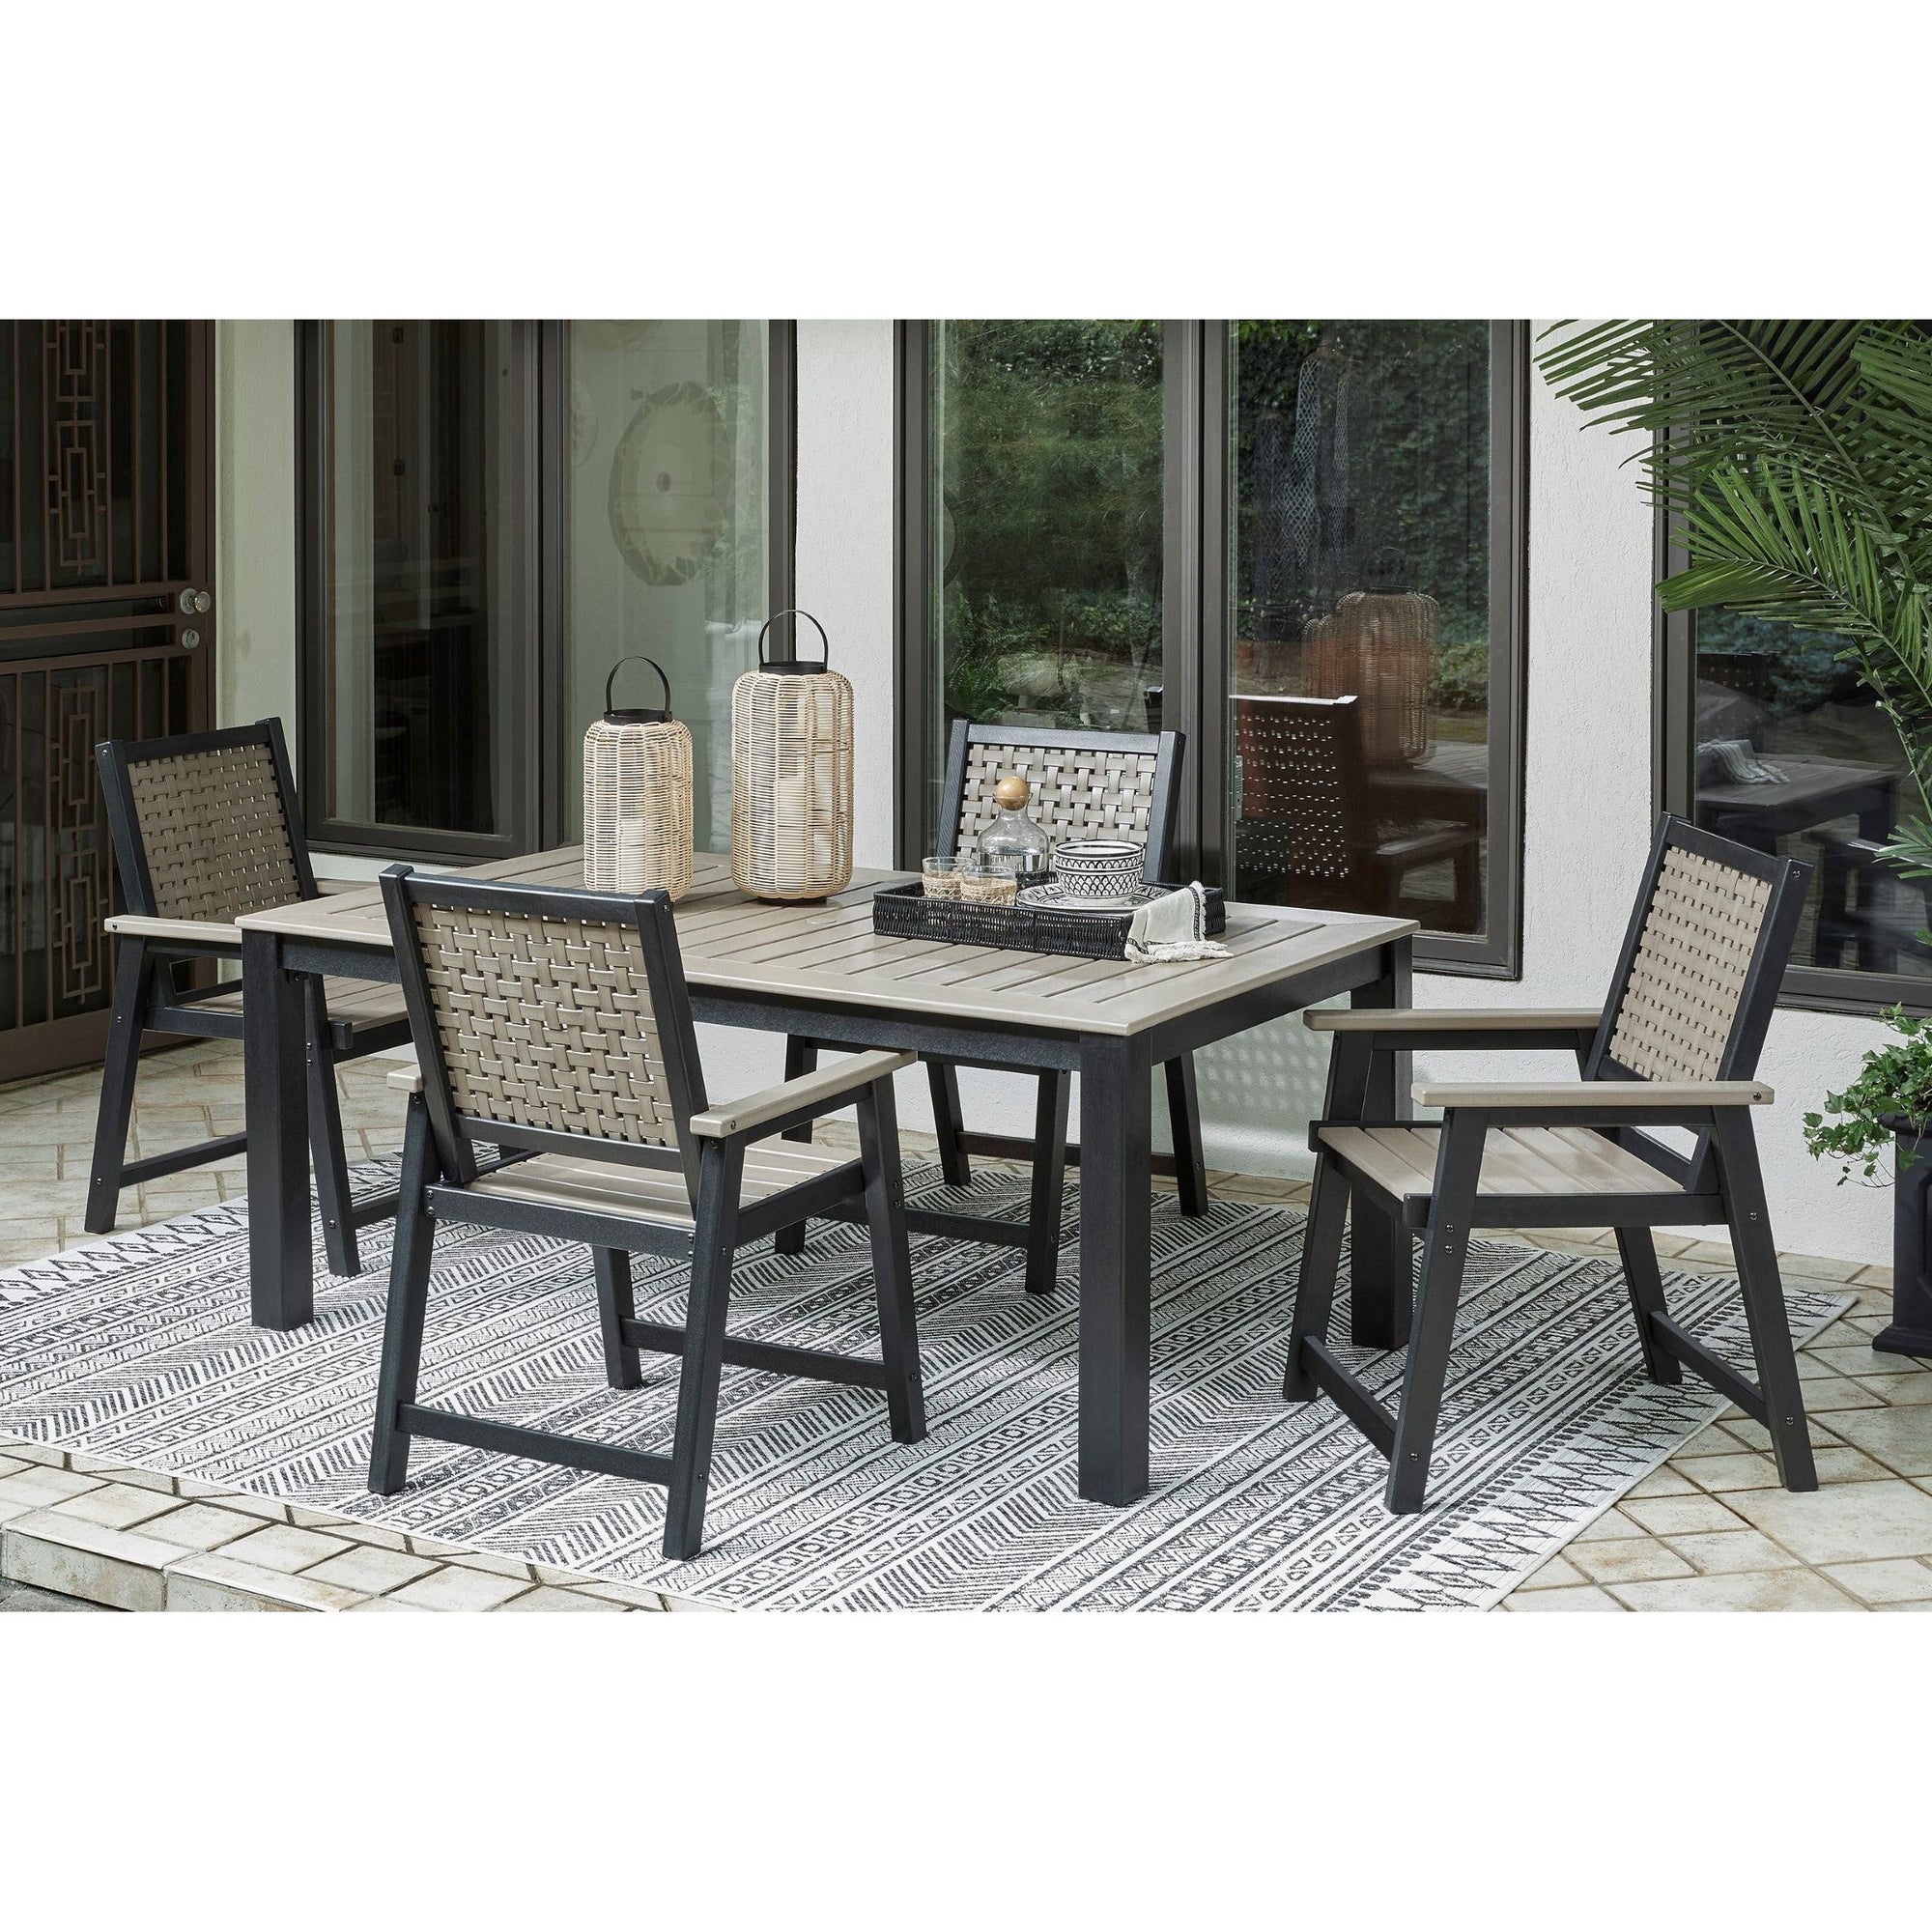 Poly Lattice  2-Tone Black/Driftwood-Taupe 7pc Outdoor 72" Dining Set